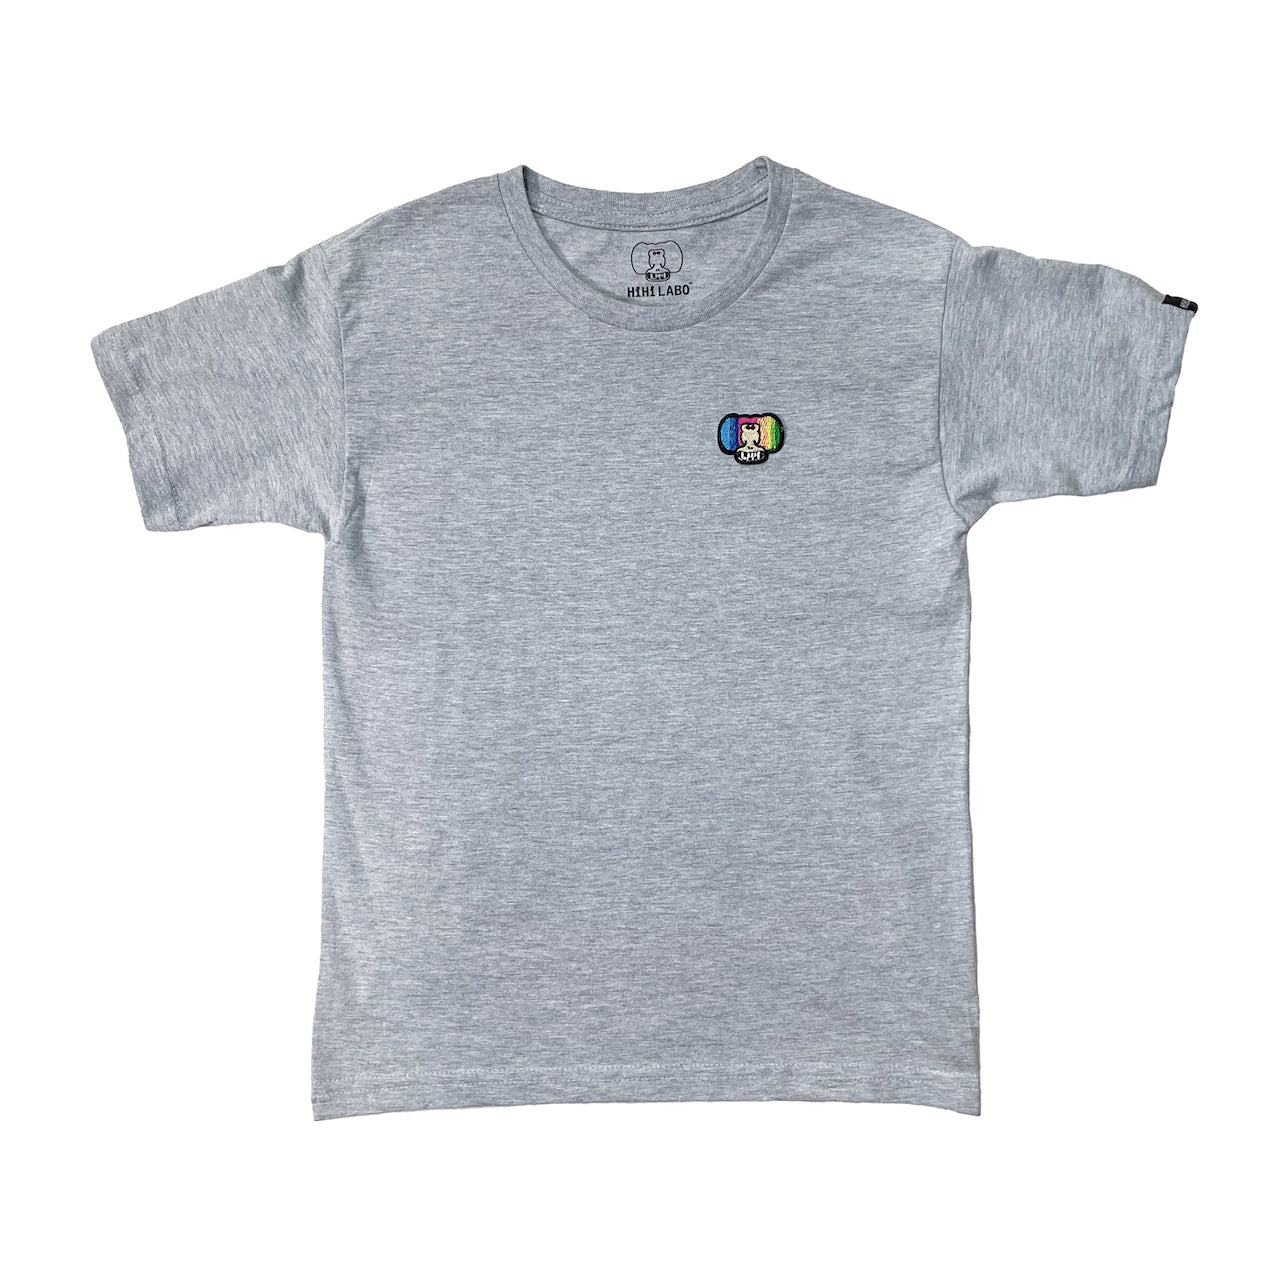 HiHi LABO Icon Embroidery T-shirt for kids/youth